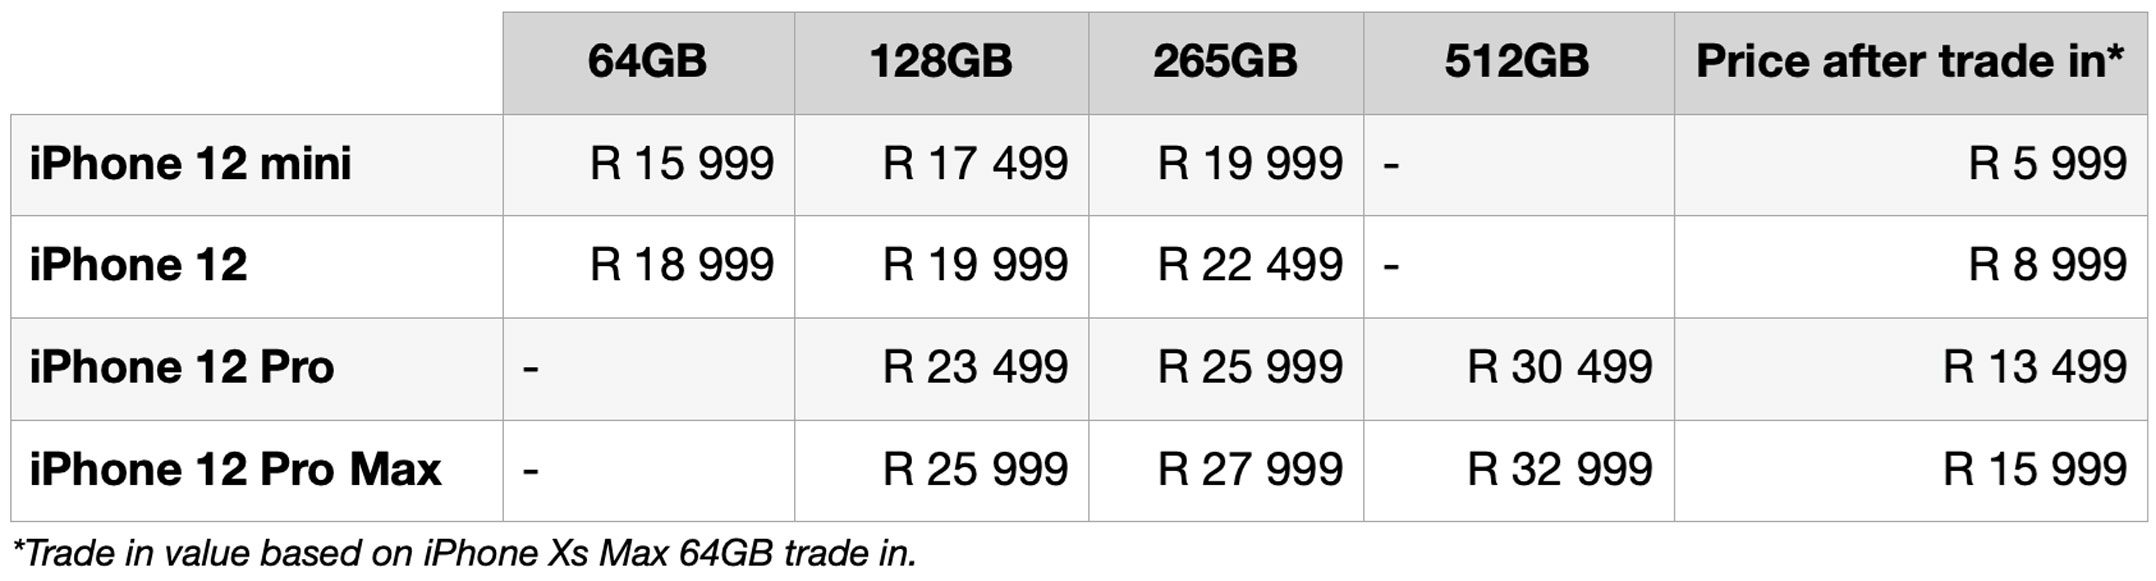 Here's how much you'll pay for the iPhone 12 in South Africa - TechCentral